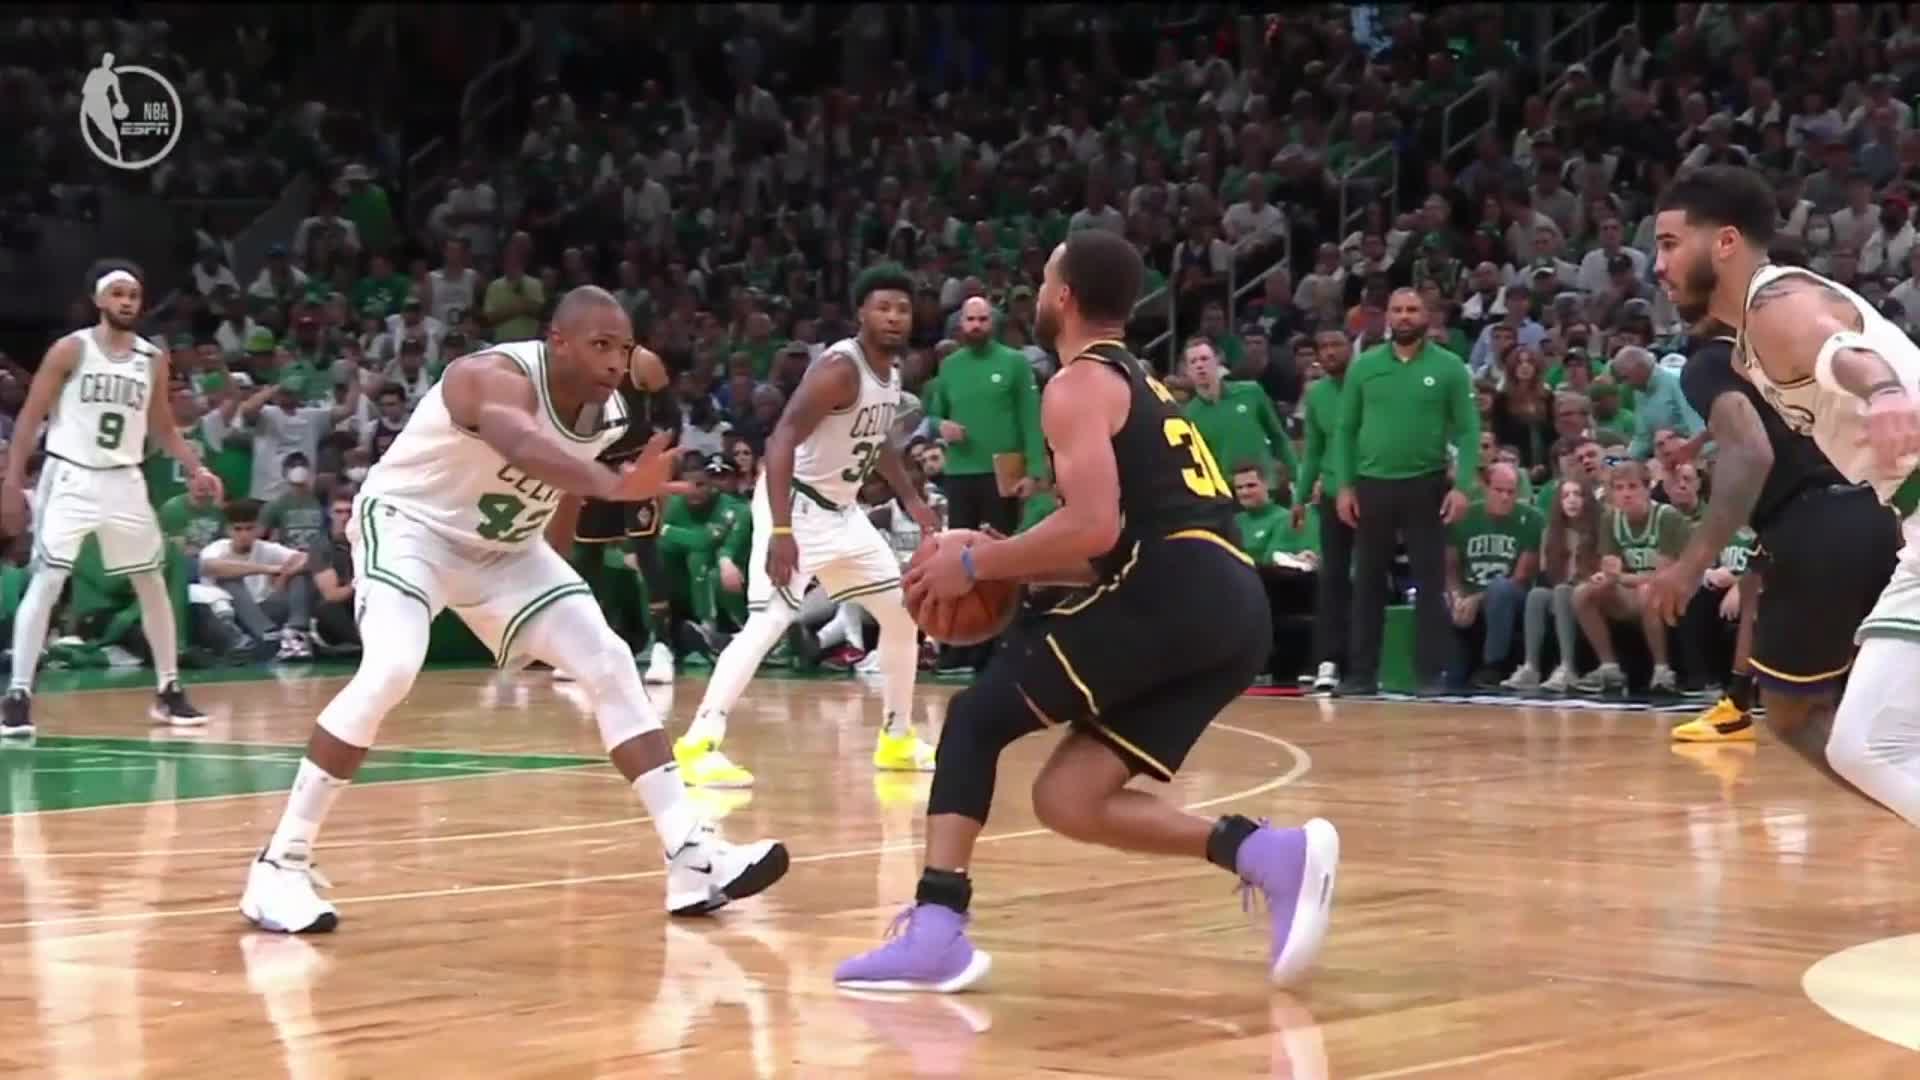 Highlight Curry hits a ridiculously deep three through contact and is irate over the non-call r/nba